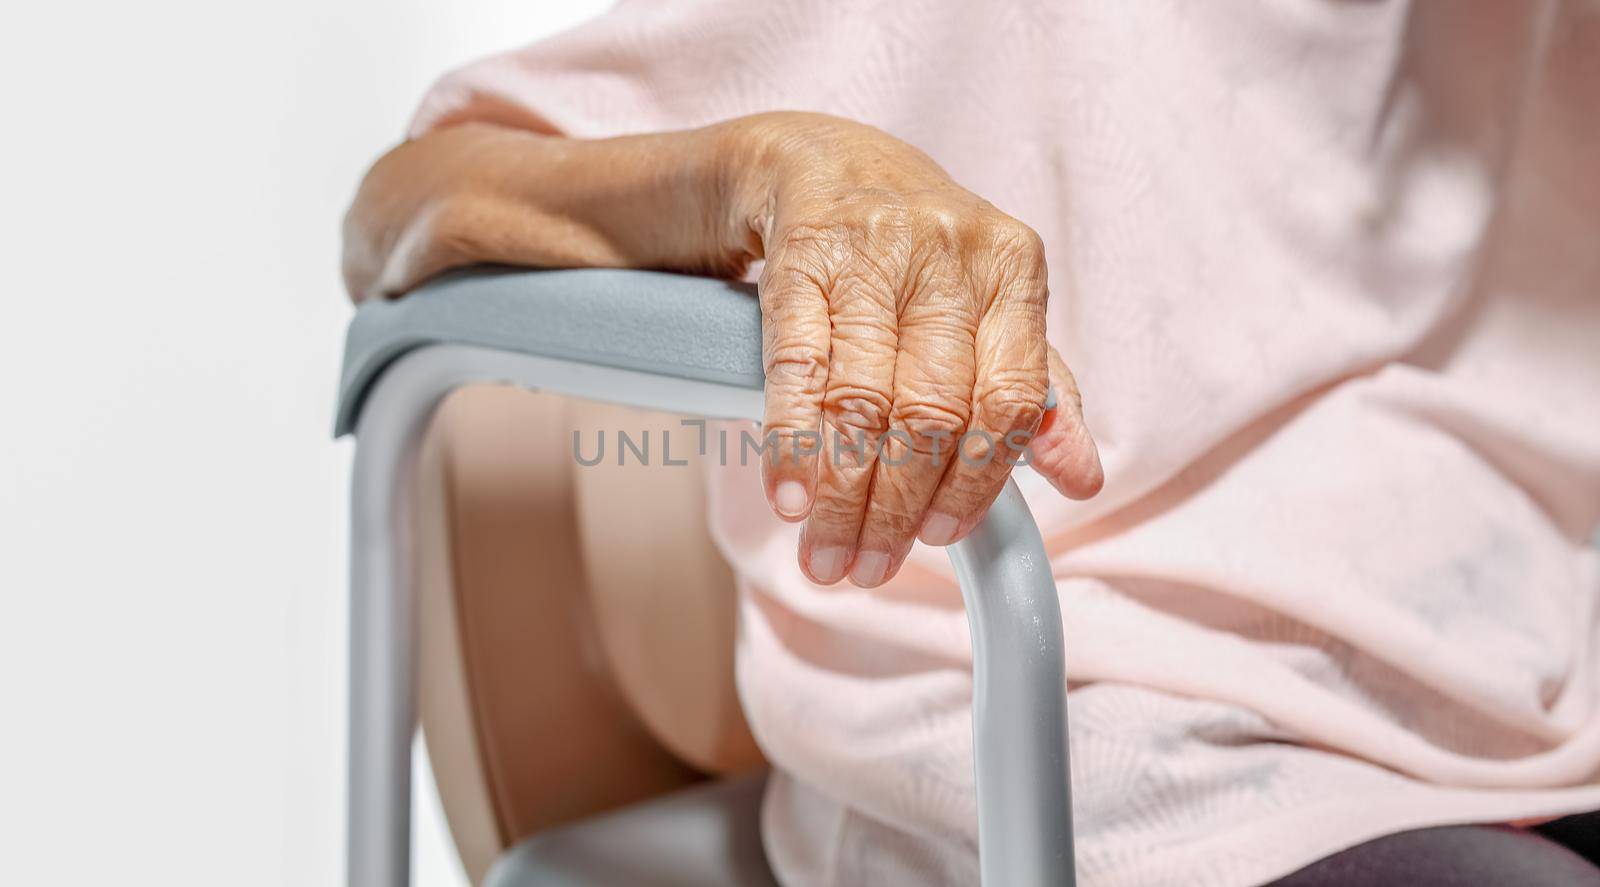 Elderly woman using mobile toilet seat chair by toa55